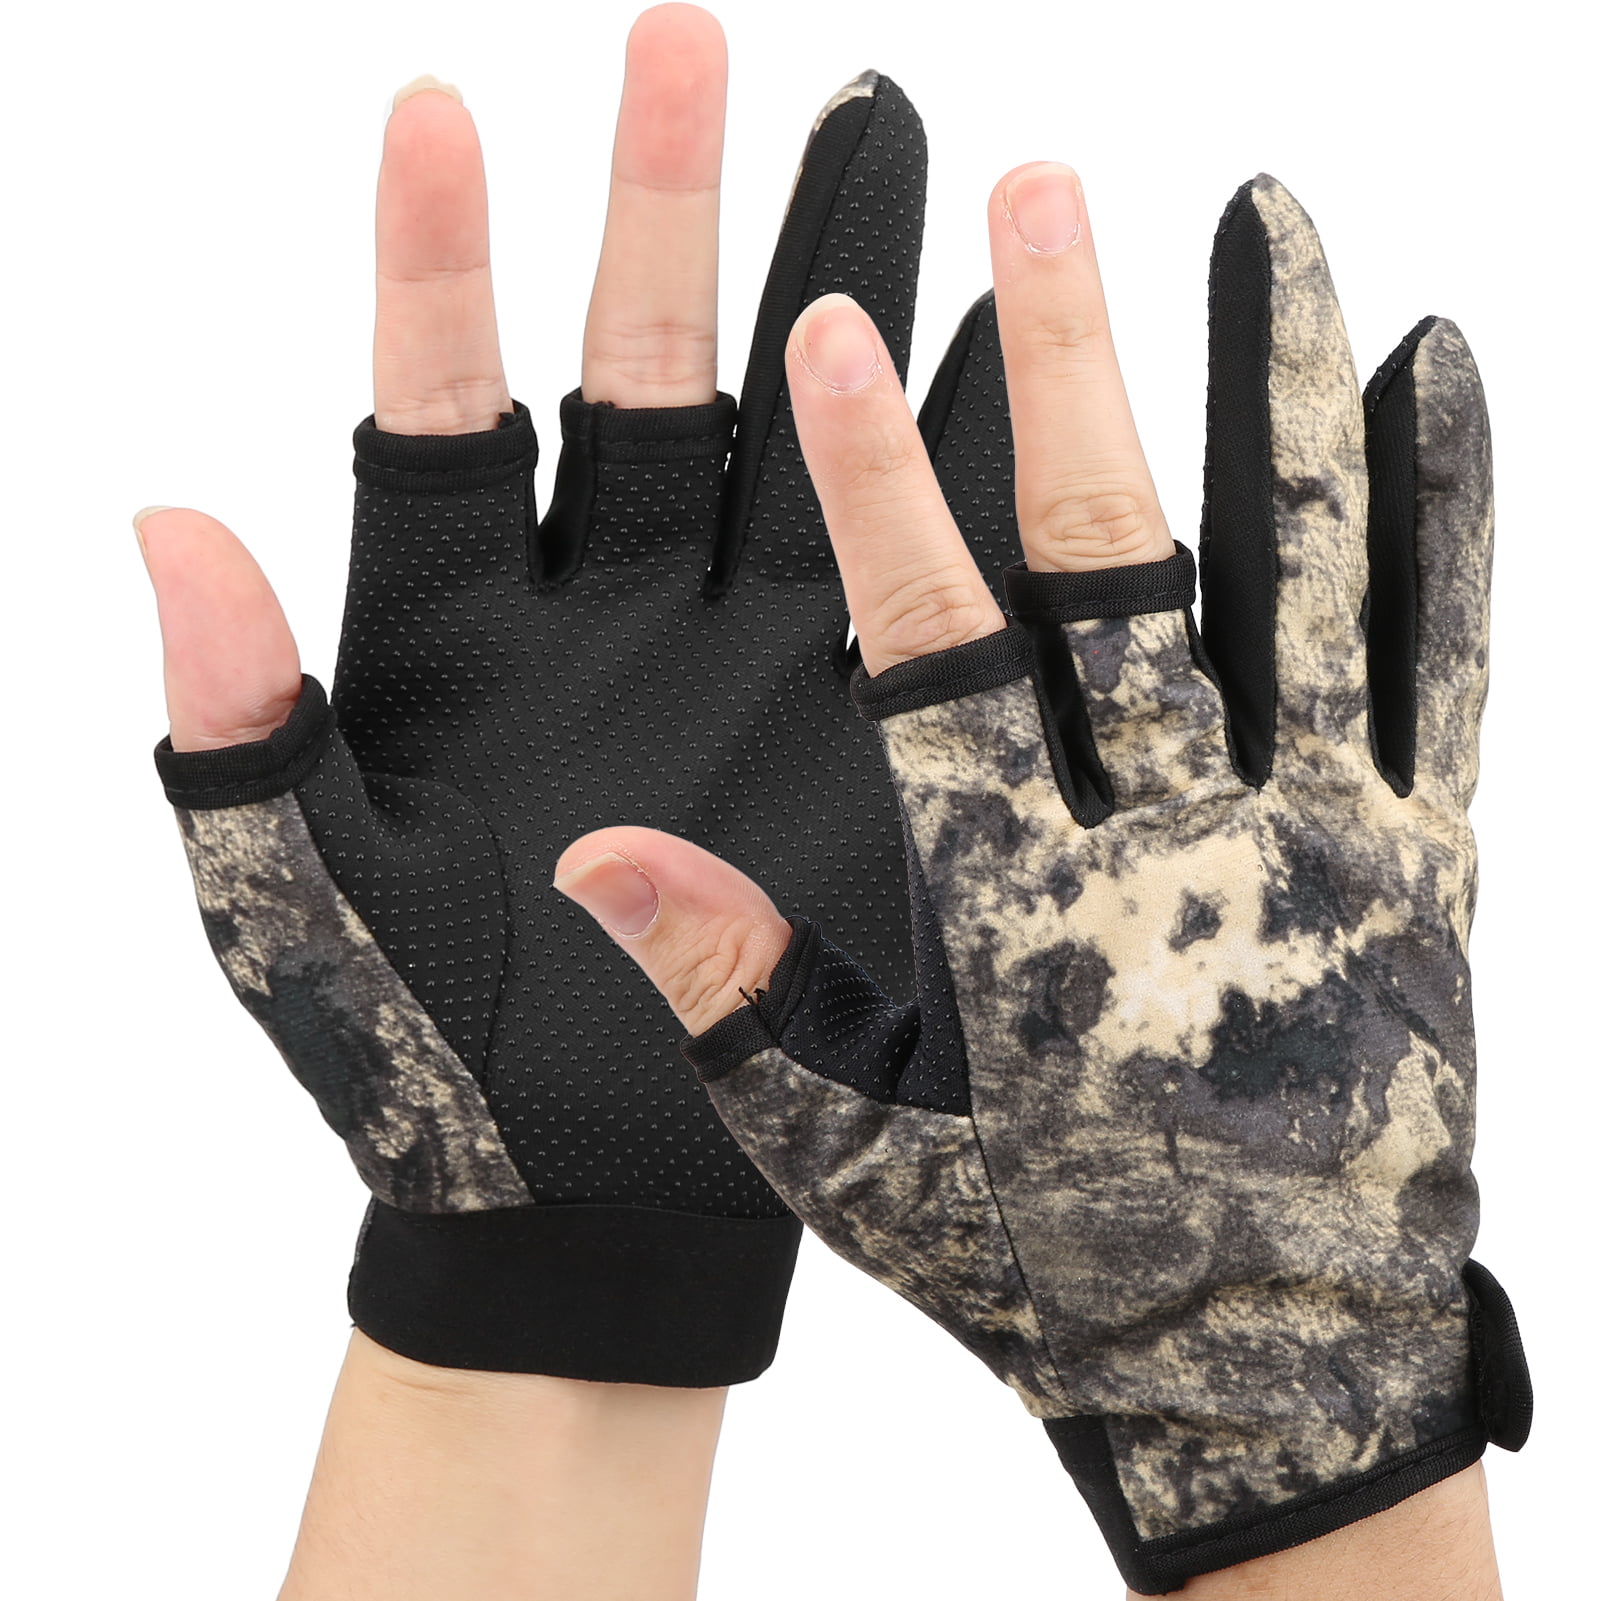 New Gloves Camo Warm Winter Hunting Bamboo Charcoal Rubber Grip Palm Soft Unisex